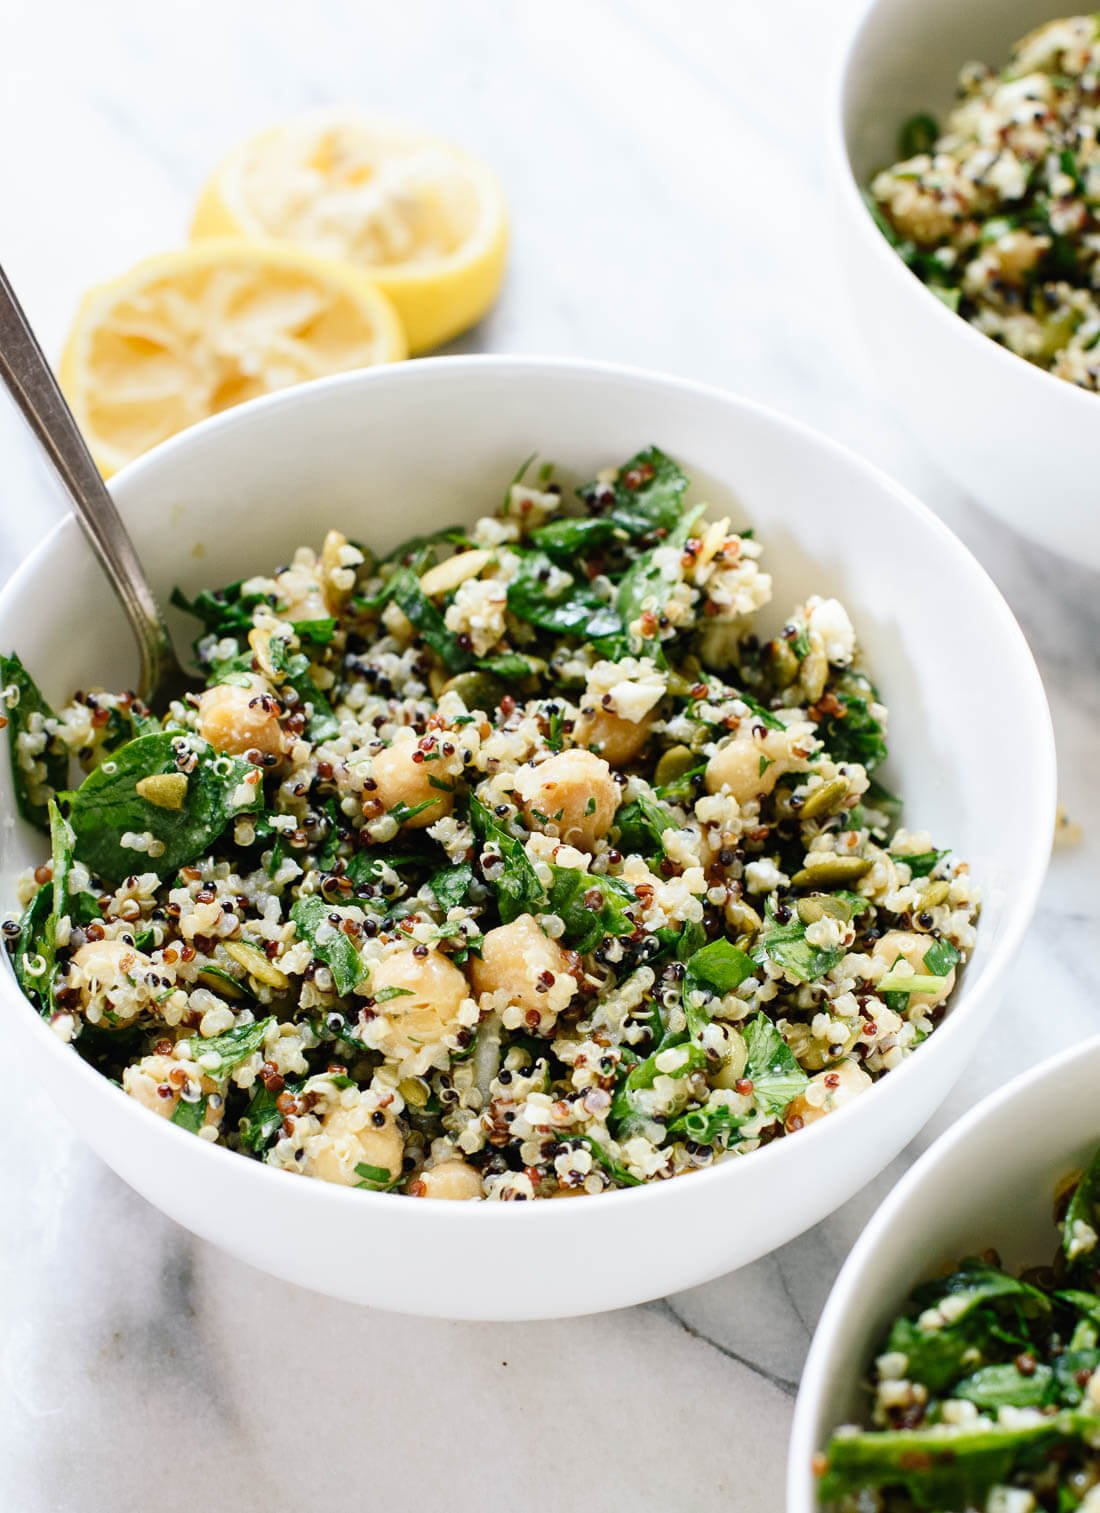 This fresh, herbed quinoa and chickpea salad makes a satisfying lunch and a great holiday side dish.